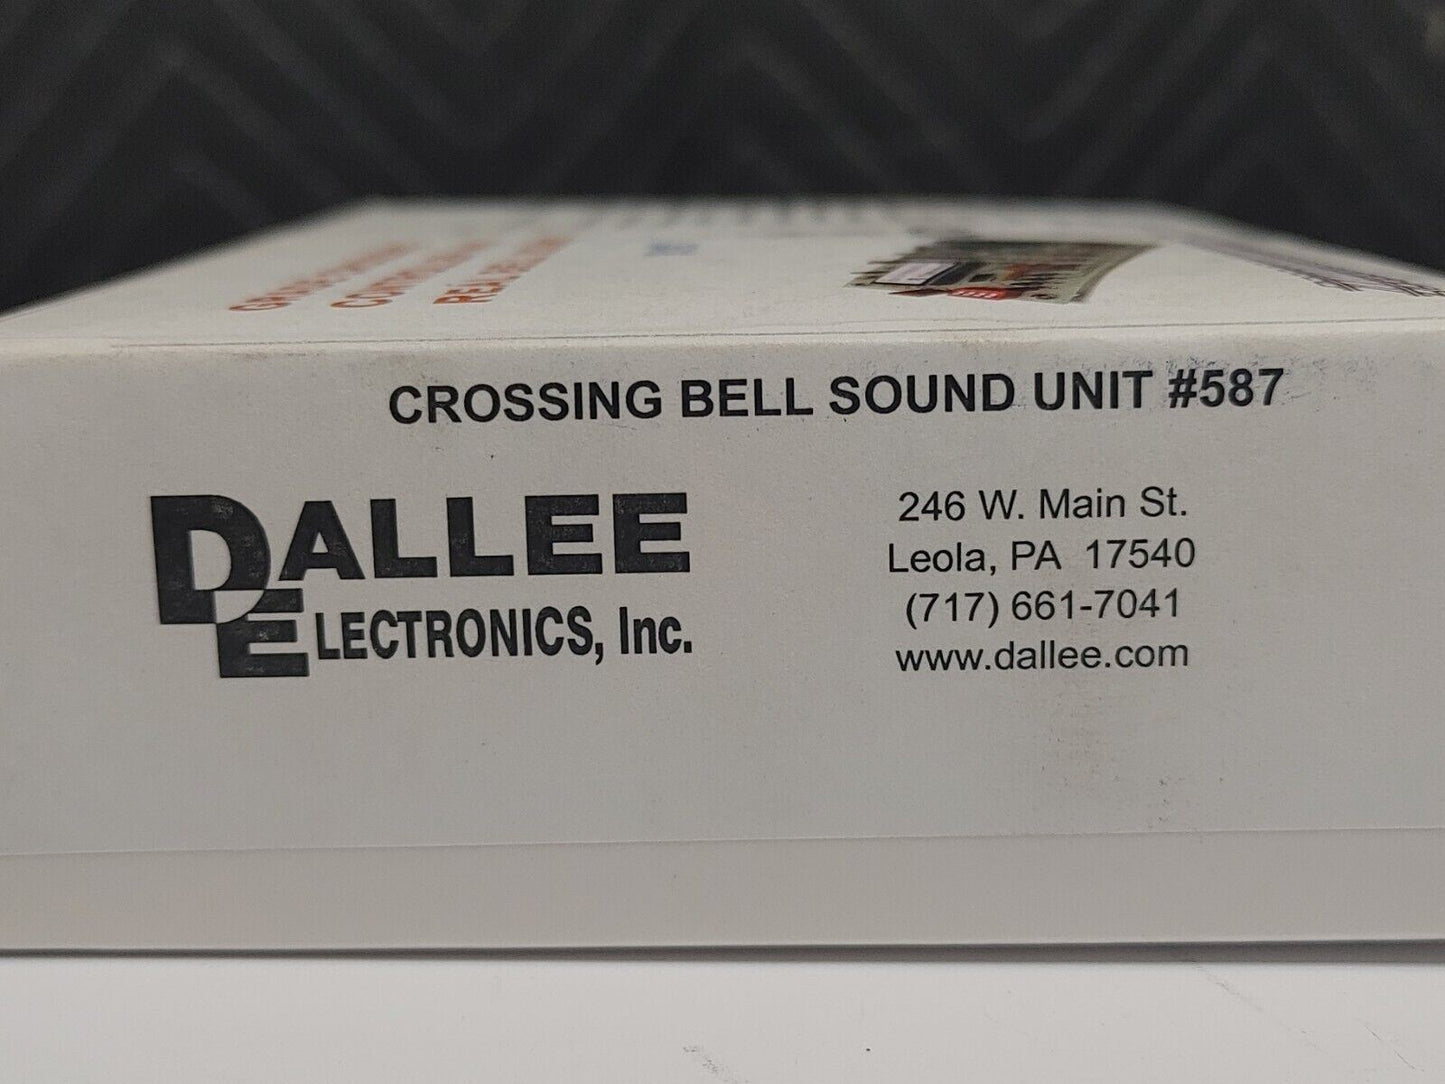 NOS DALLEE ELECTRONICS GRADE CROSSING CONTROLLER WITH REAL BELL SOUND ITEM #587